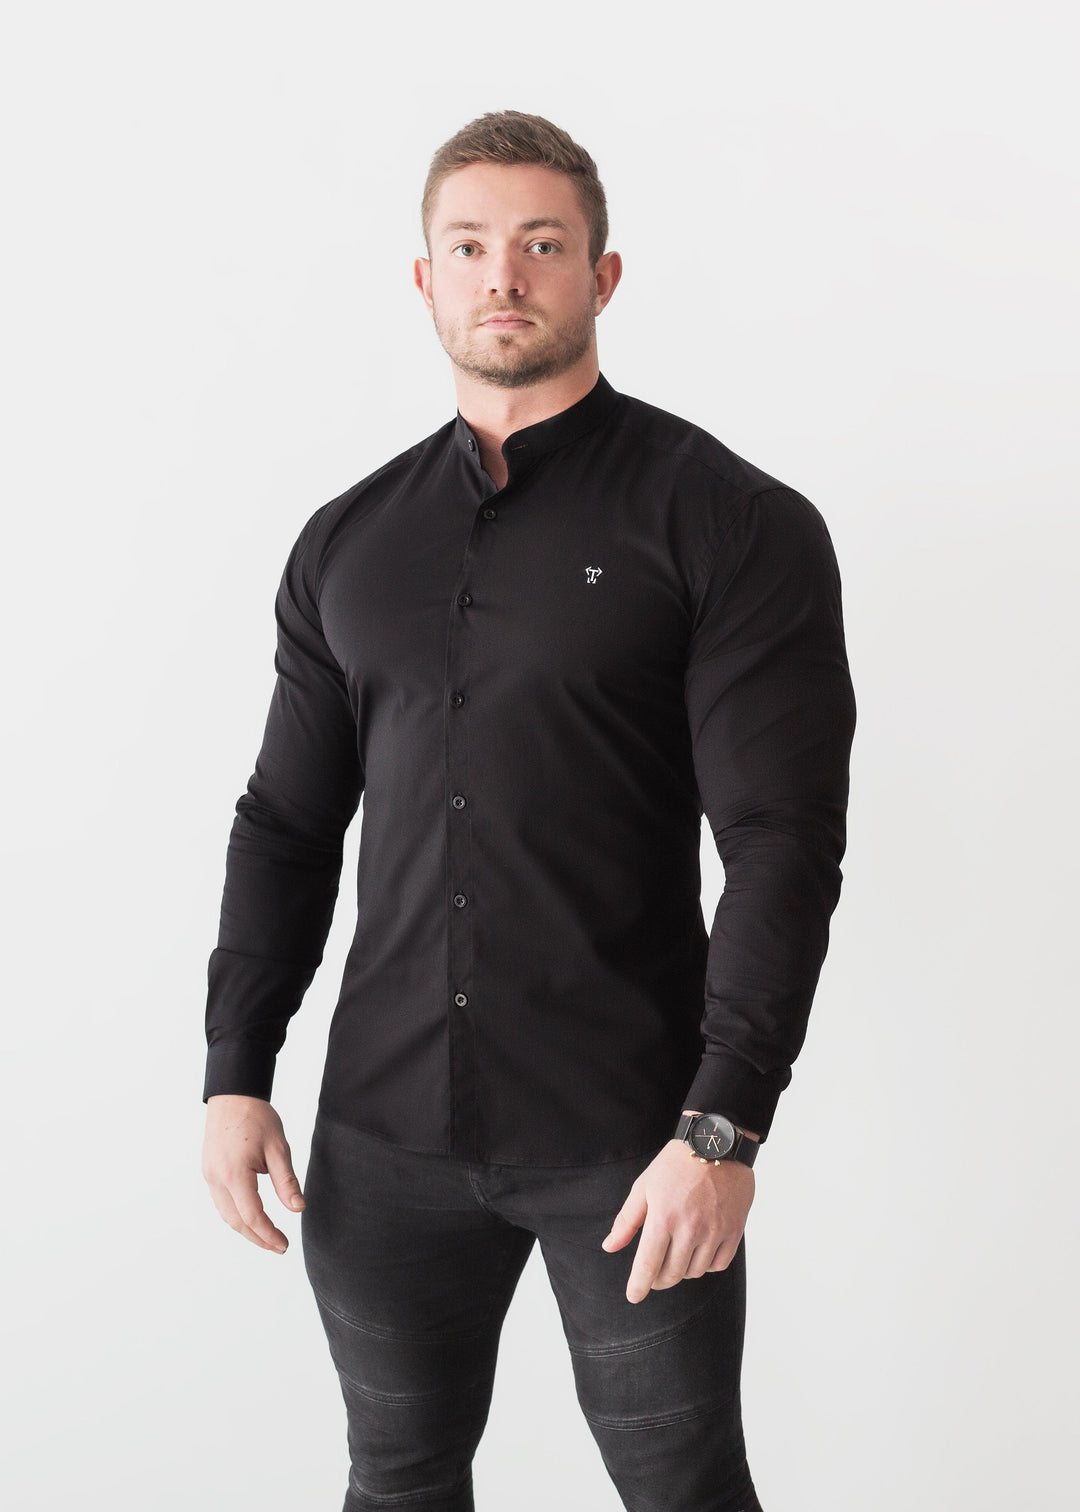 Grandad Collar Black Tapered Fit Shirt. A Proportionally Fitted and Comfortable Muscle Fit Shirt. The Best Shirts For a Muscular Build